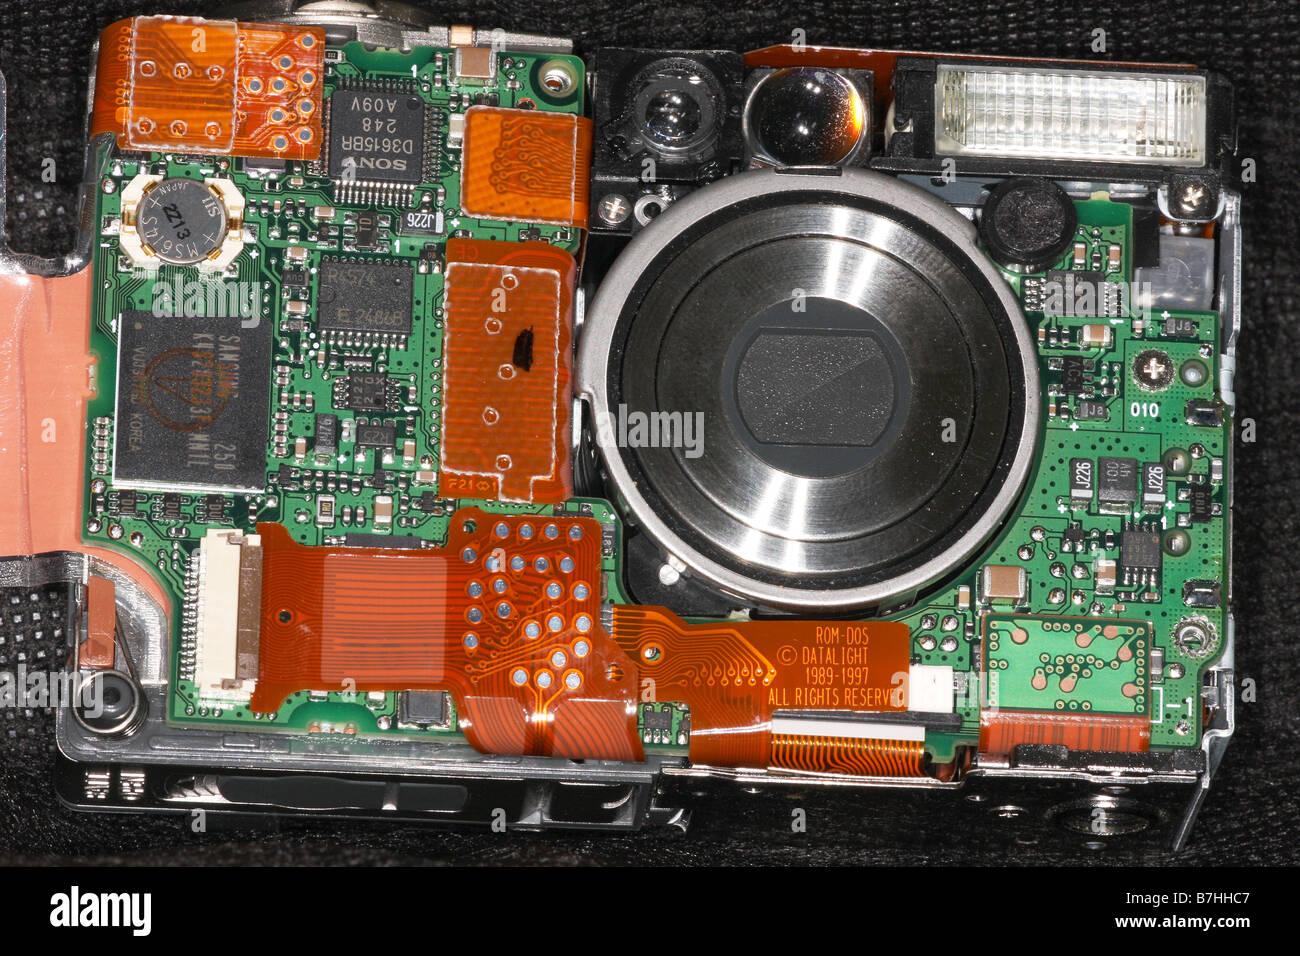 The main circuit board in a digital camera with lens assembly on the right. Stock Photo